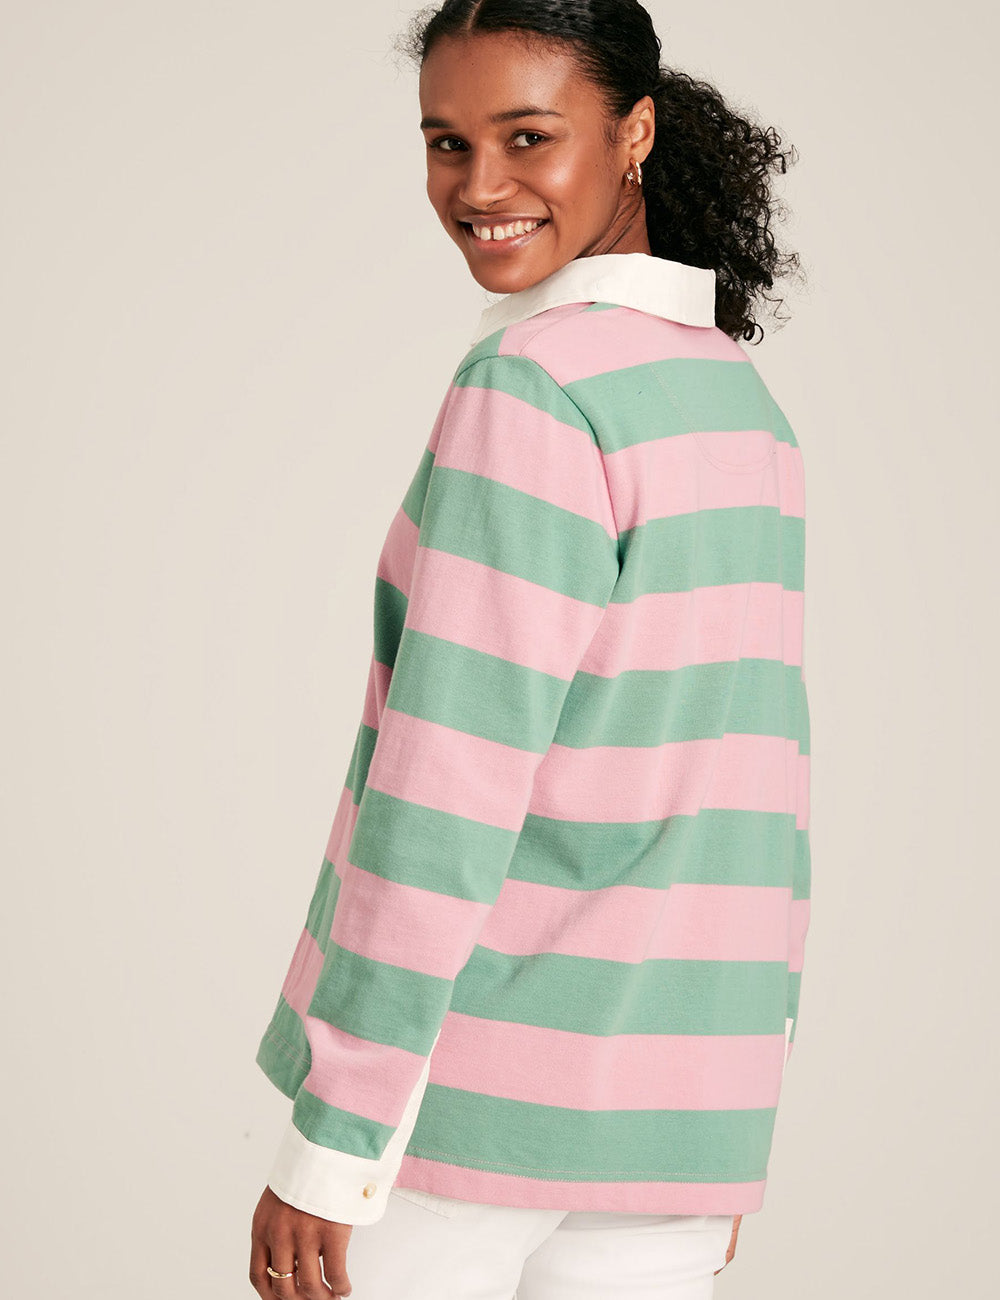 Joules Falmouth Rugby Shirt - Pink/Green Stripe